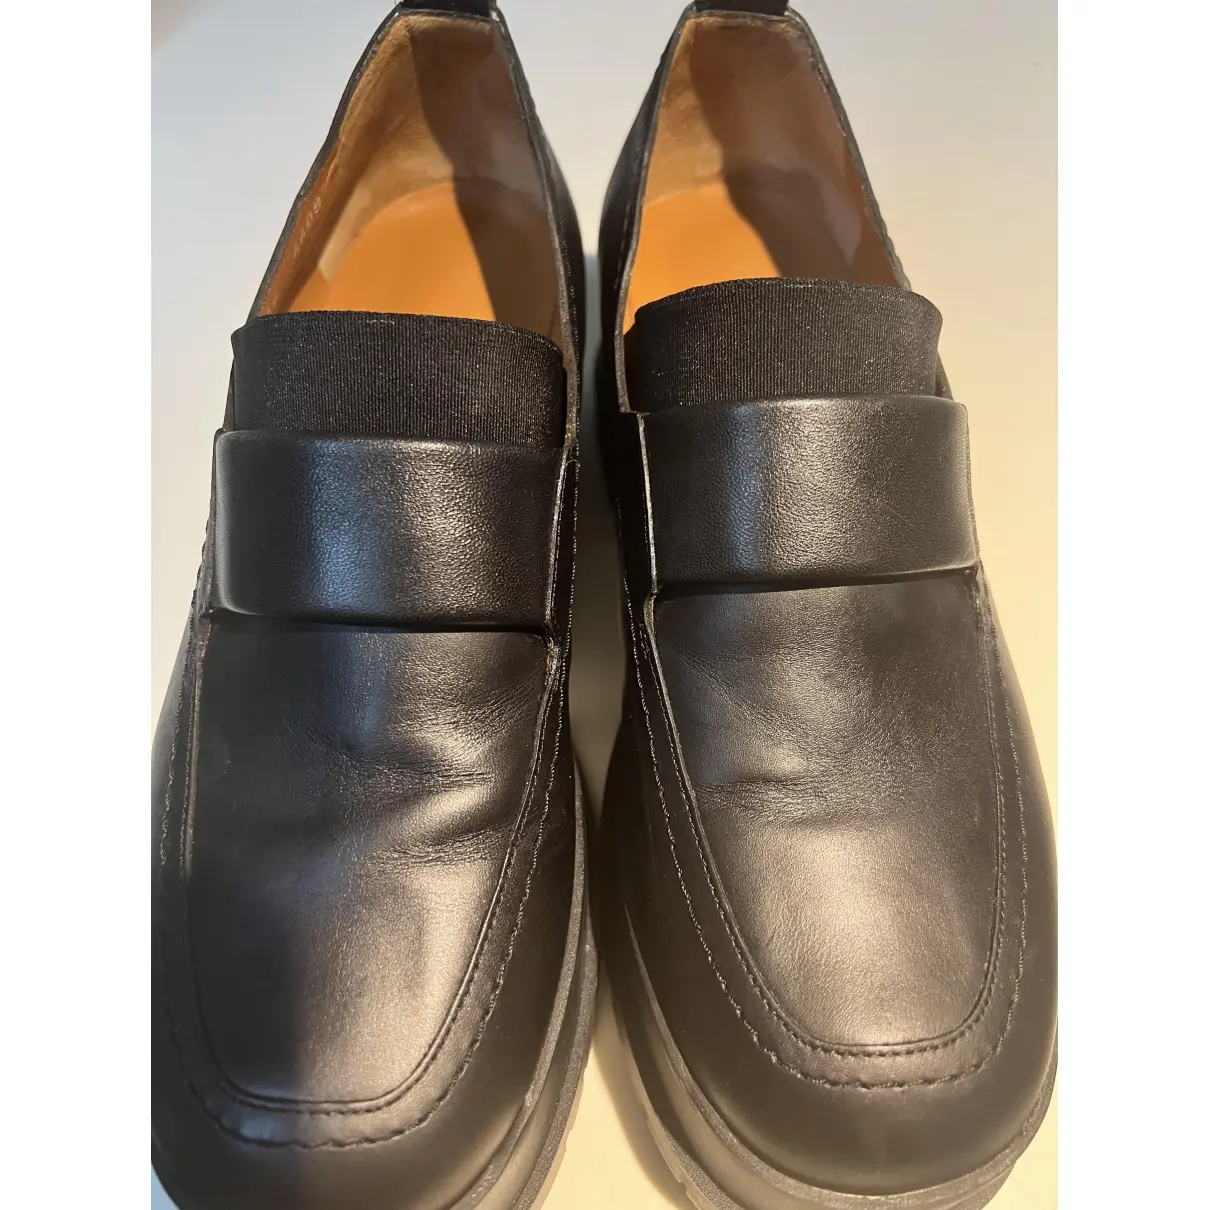 Buy Robert Clergerie Leather flats online